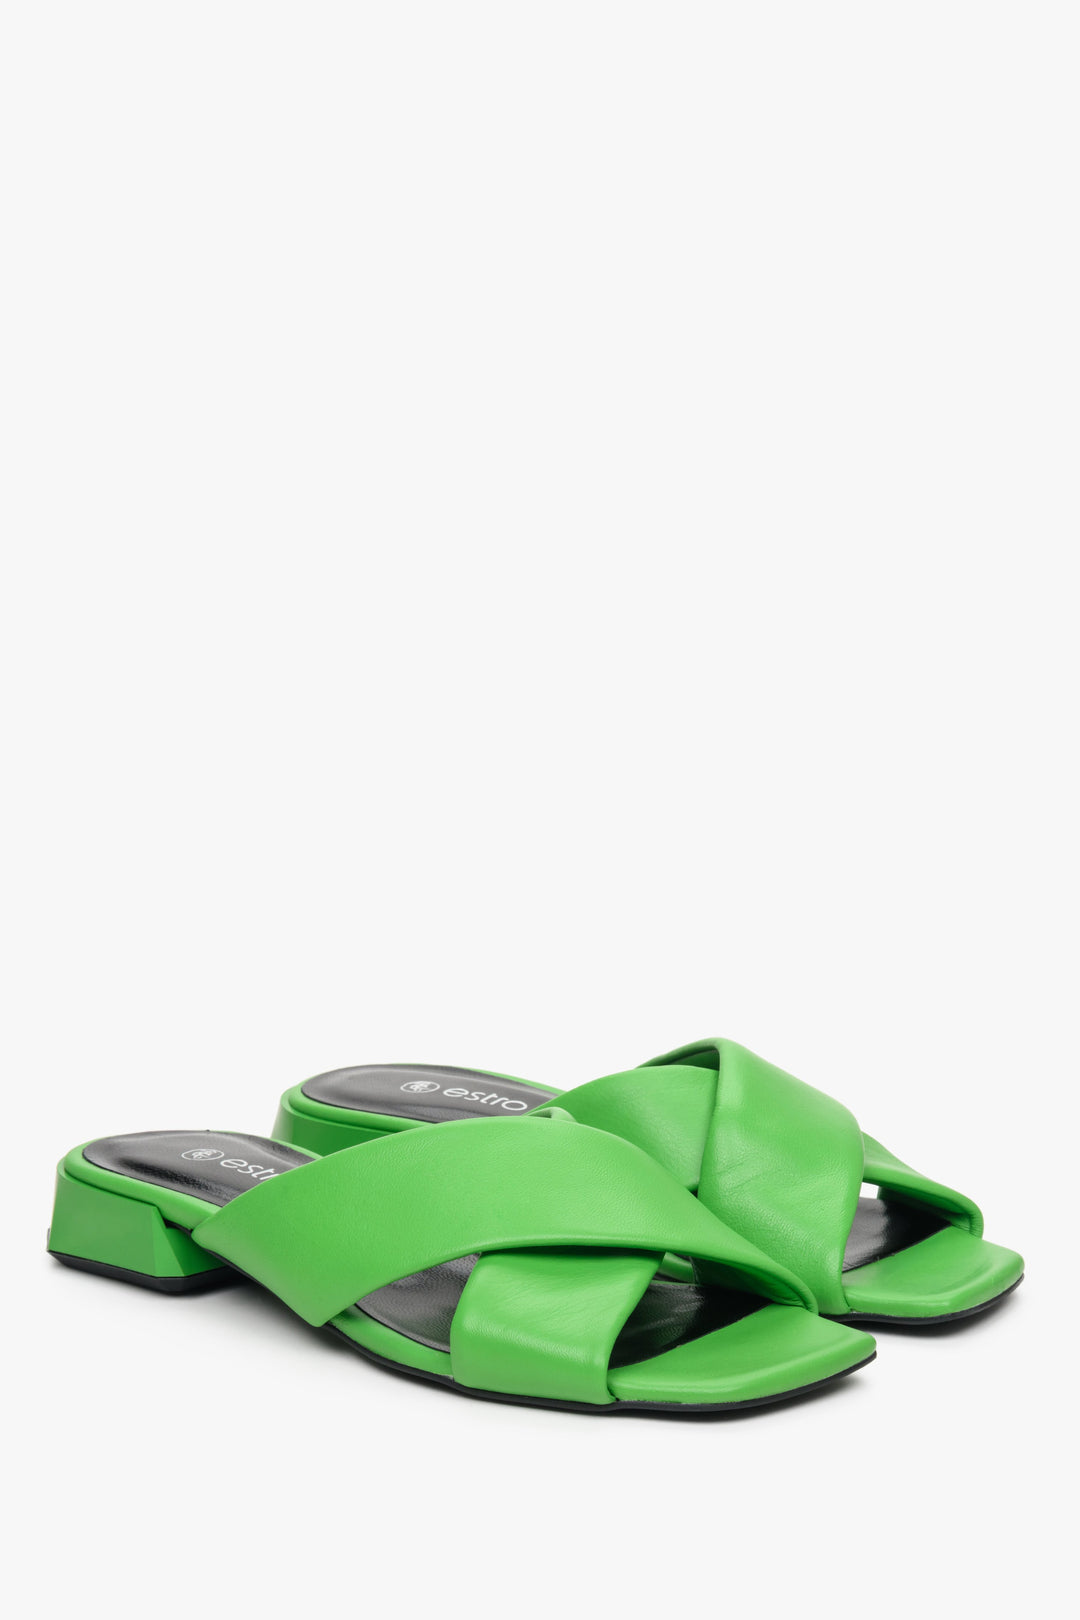 Women's Estro leather mules for summer with cross-straps on a low heel, green colour.